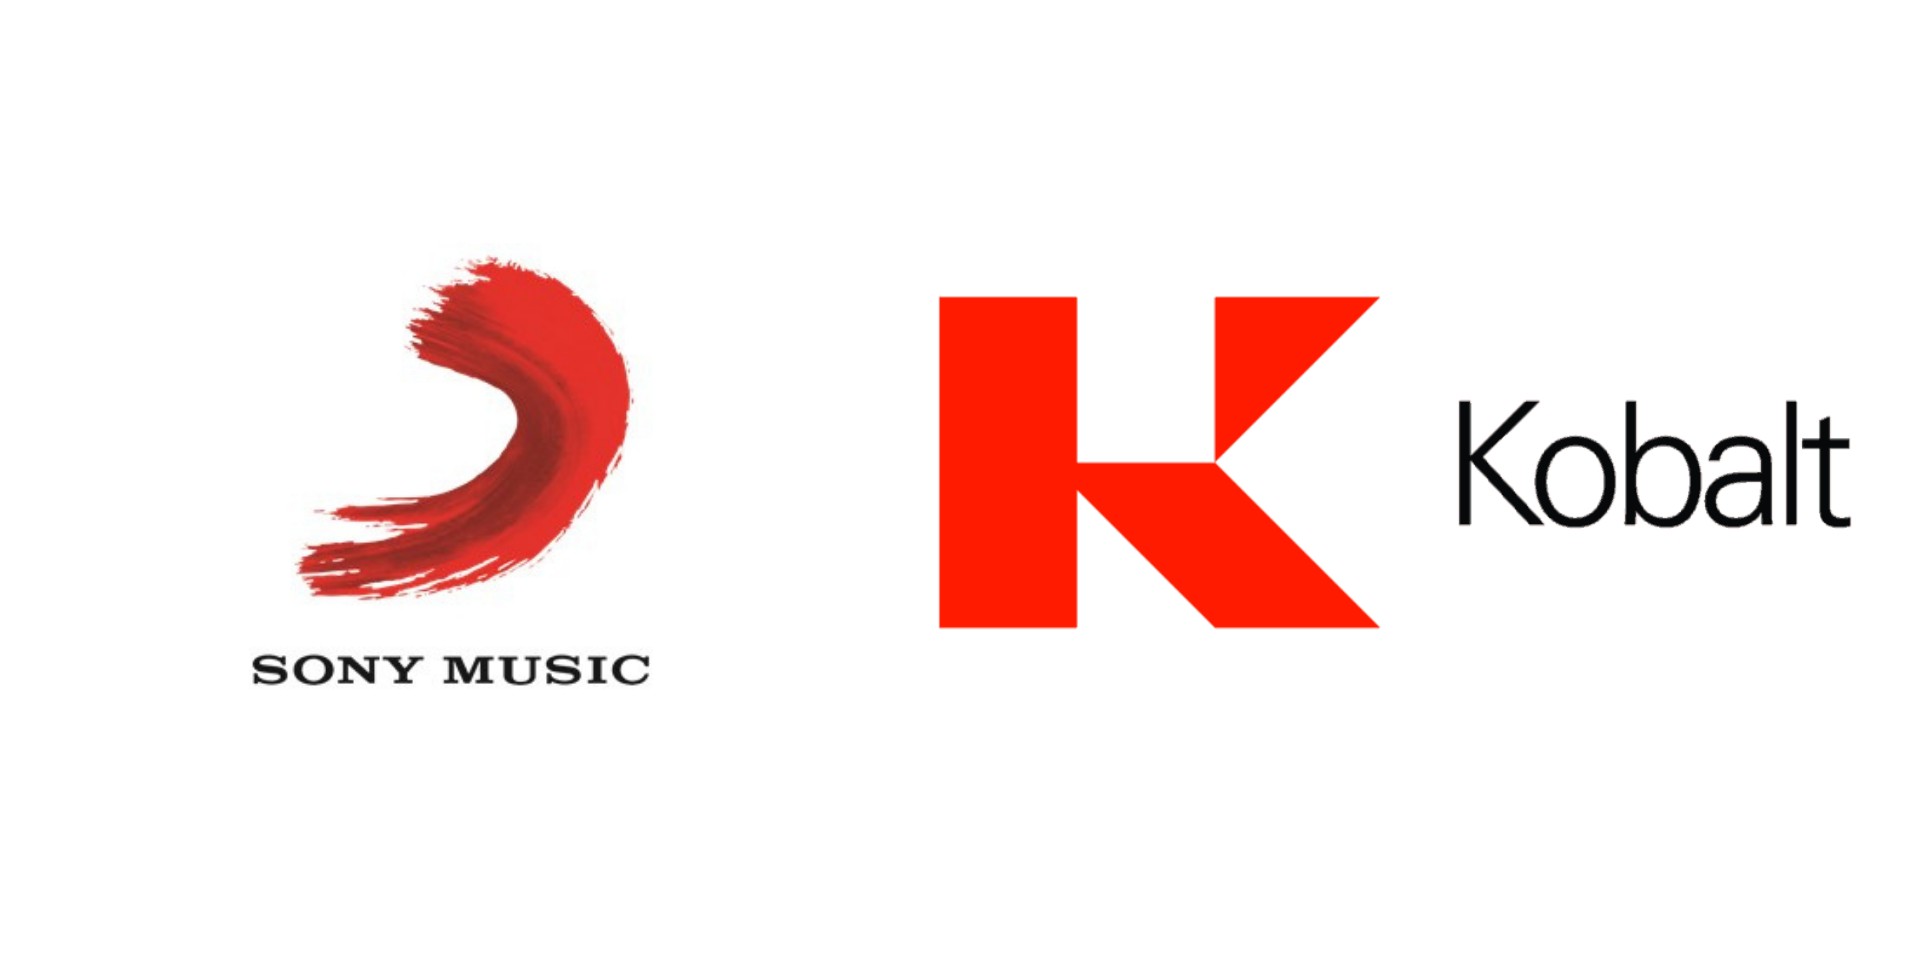 Sony Music buys AWAL and Kobalt Neighbouring Rights from Kobalt Music Group for $430 million